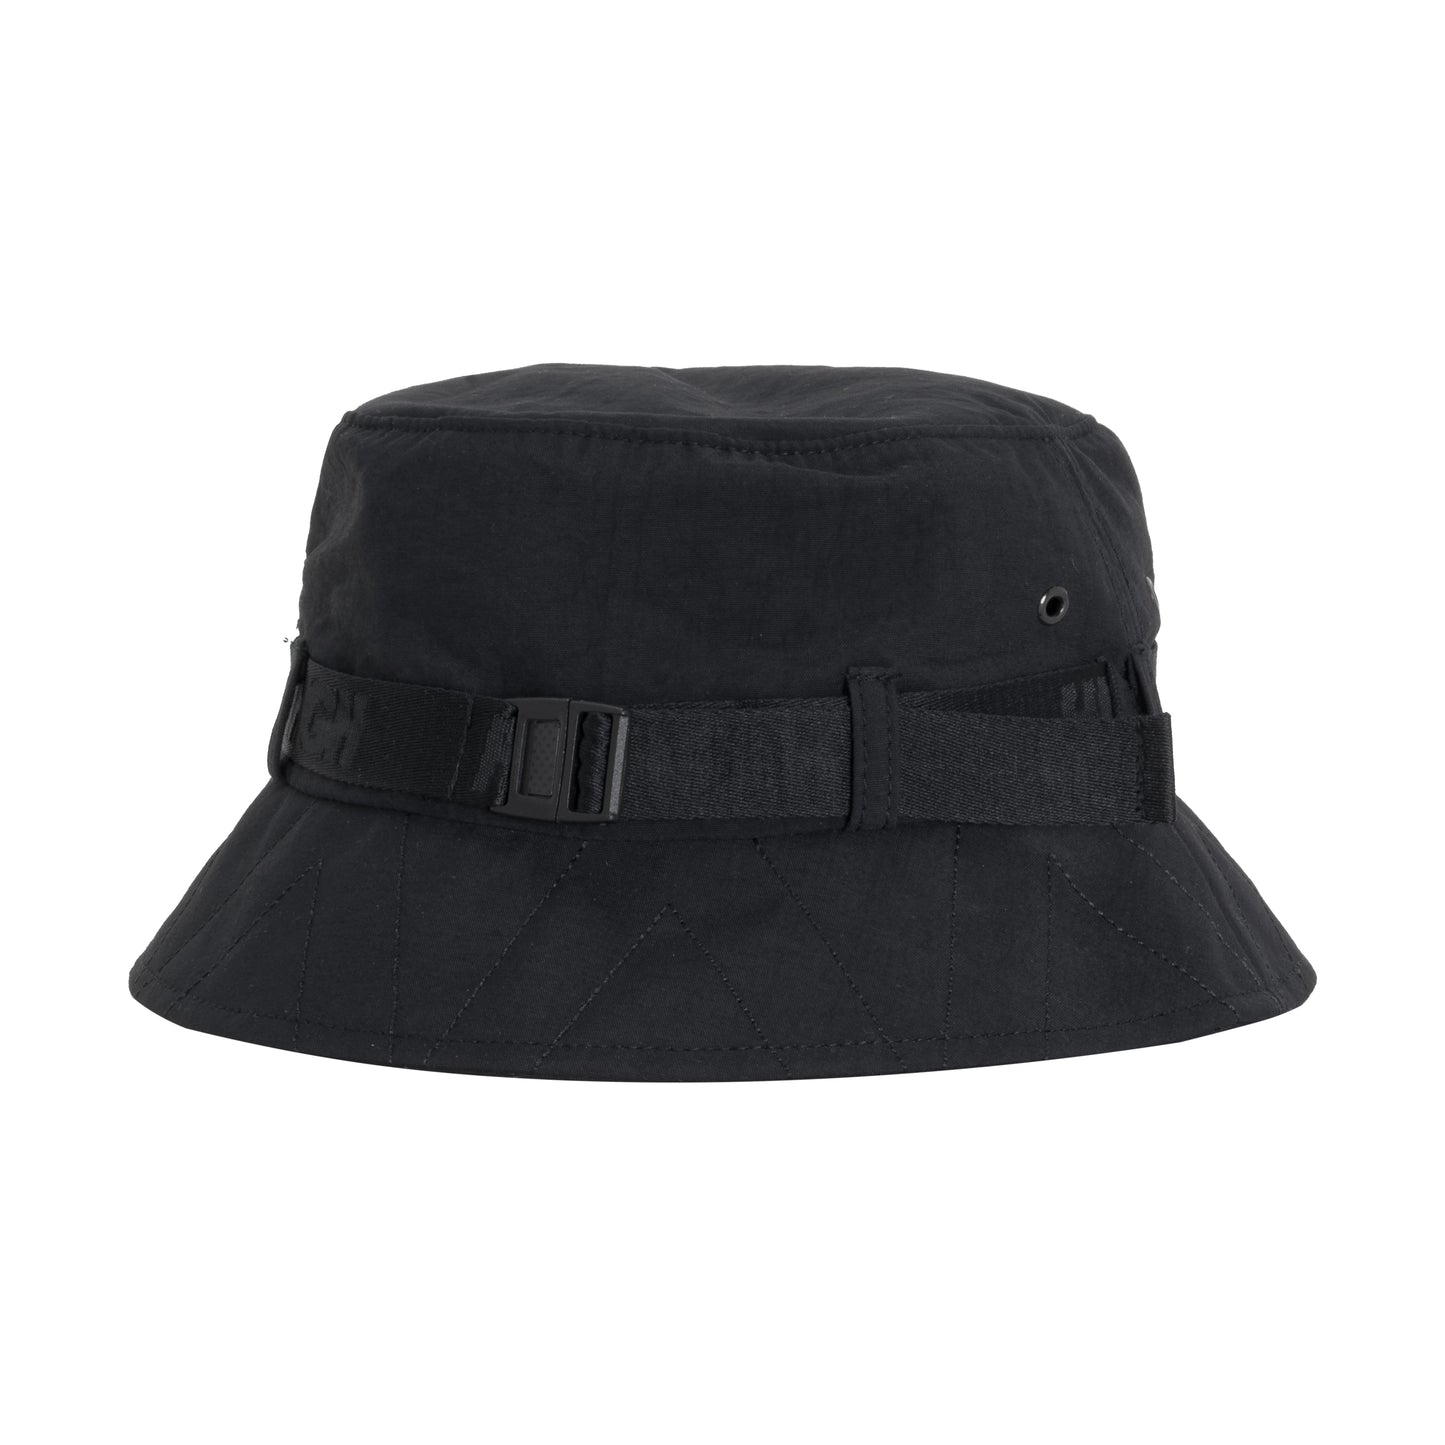 HIGH - Strapped Bucket Black